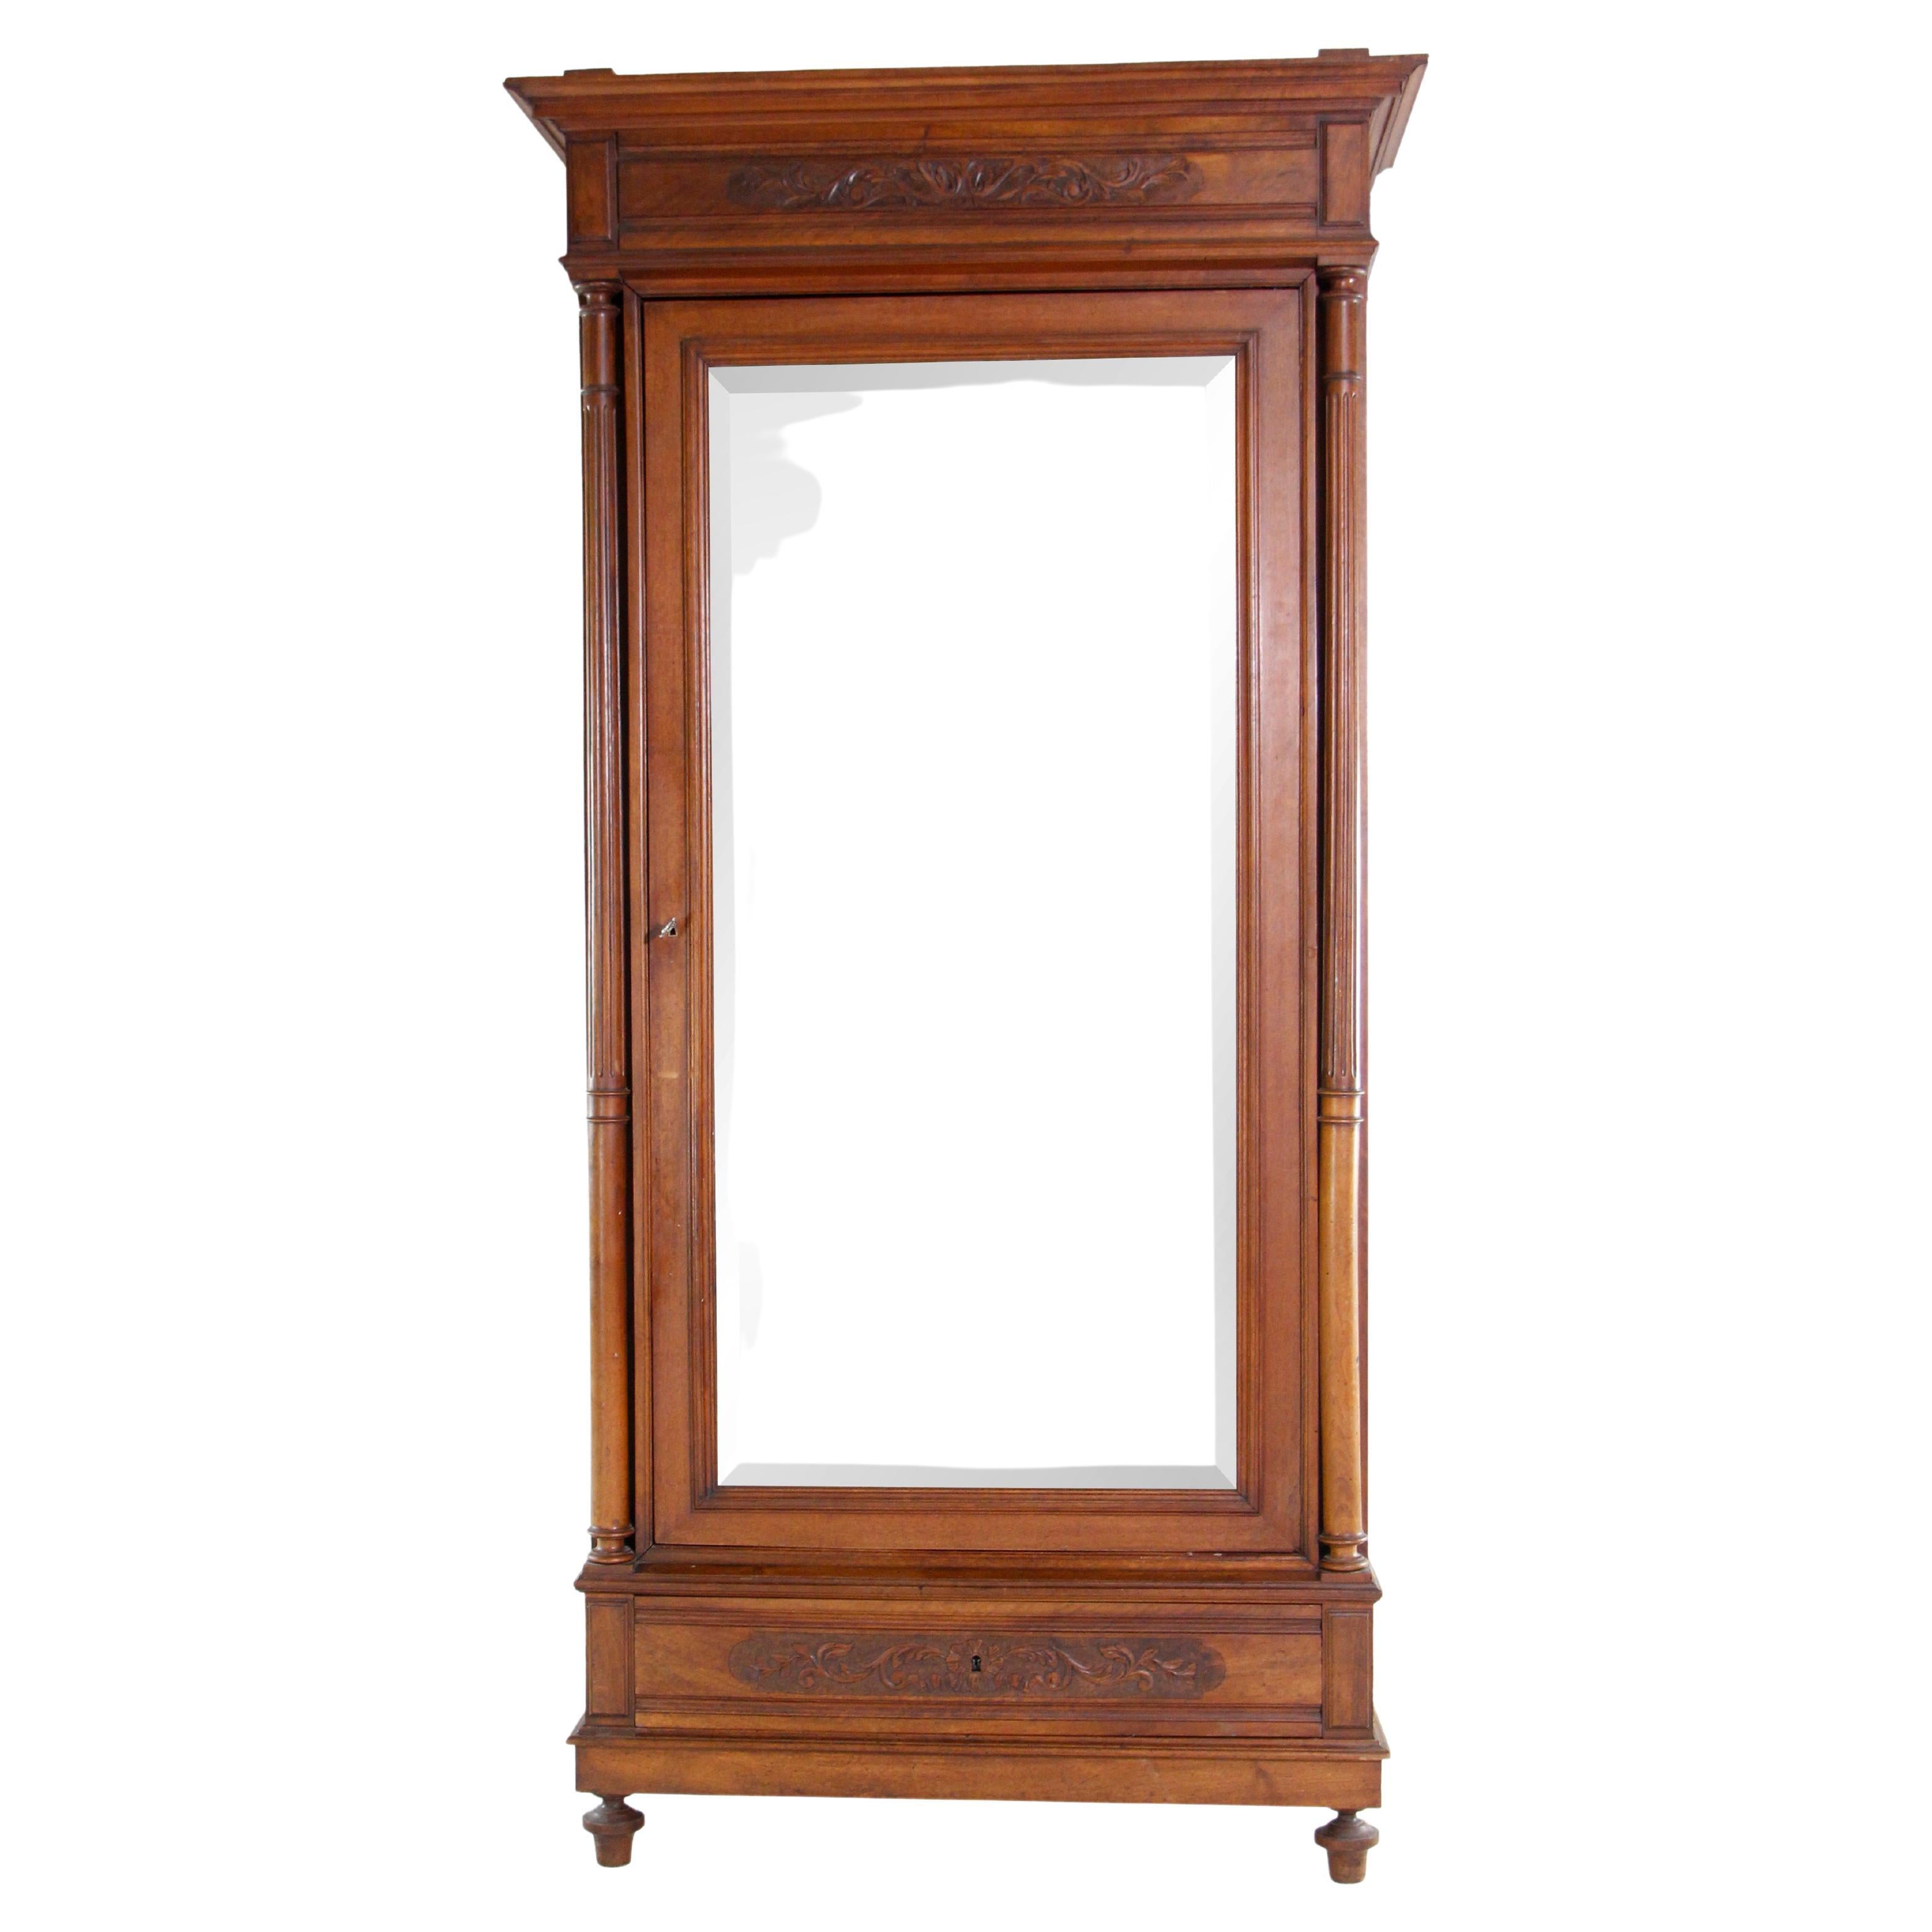 1930s Walnut Armoire Carved Details W/ 7 Shelves Small Drawer and Beveled Mirror